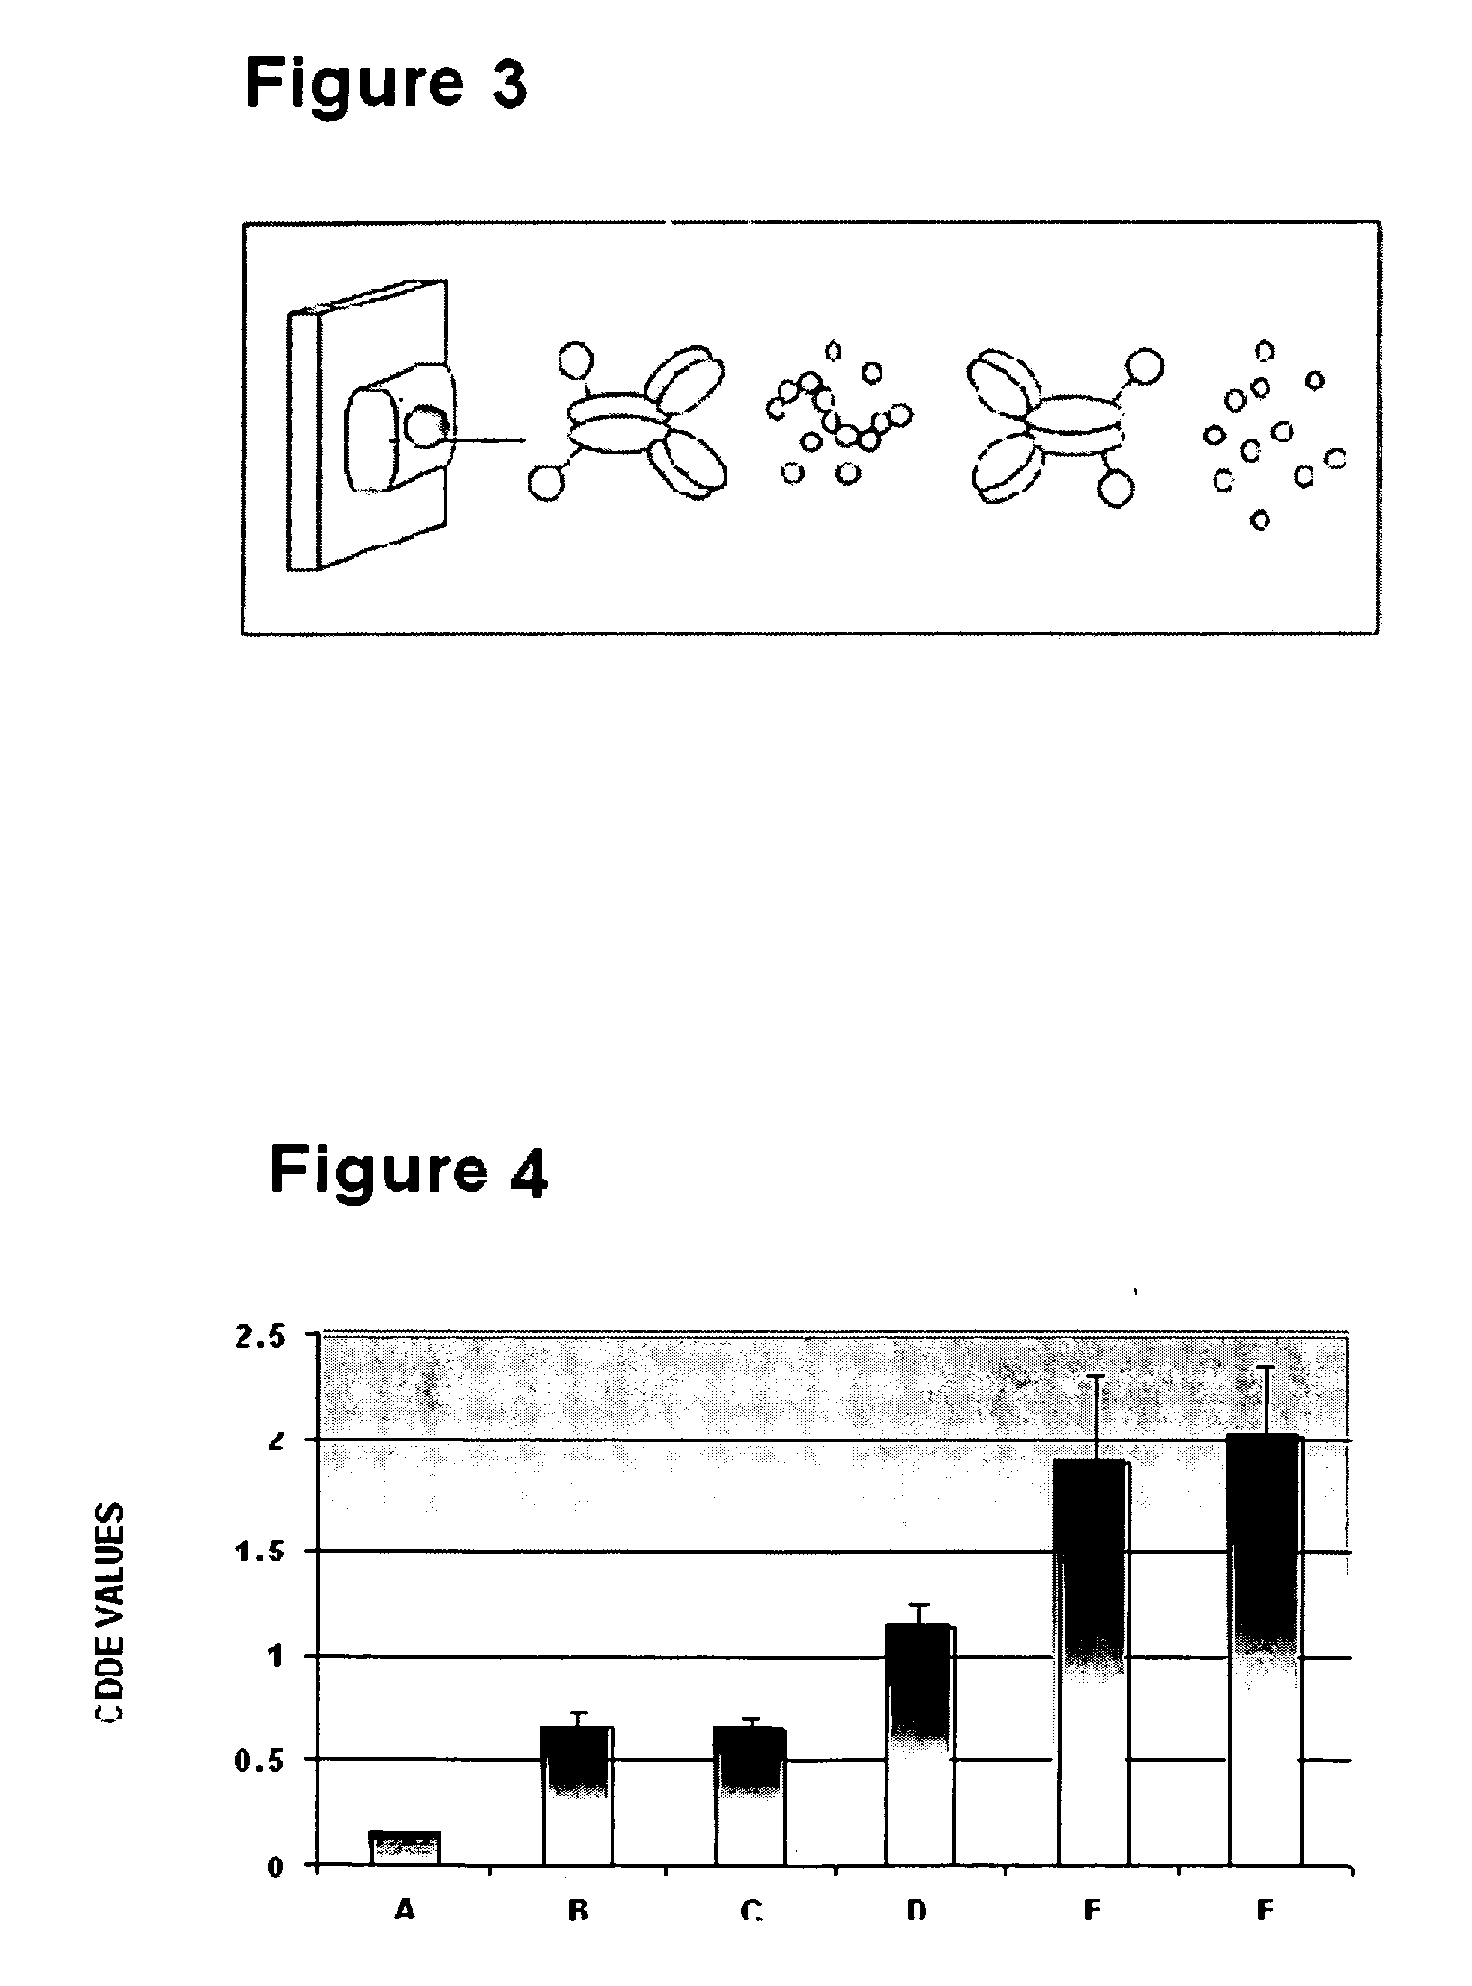 Method for ex-vivo separation of apoptotic chromatin fragments from blood or plasma for prevention and treatment of diverse human diseases